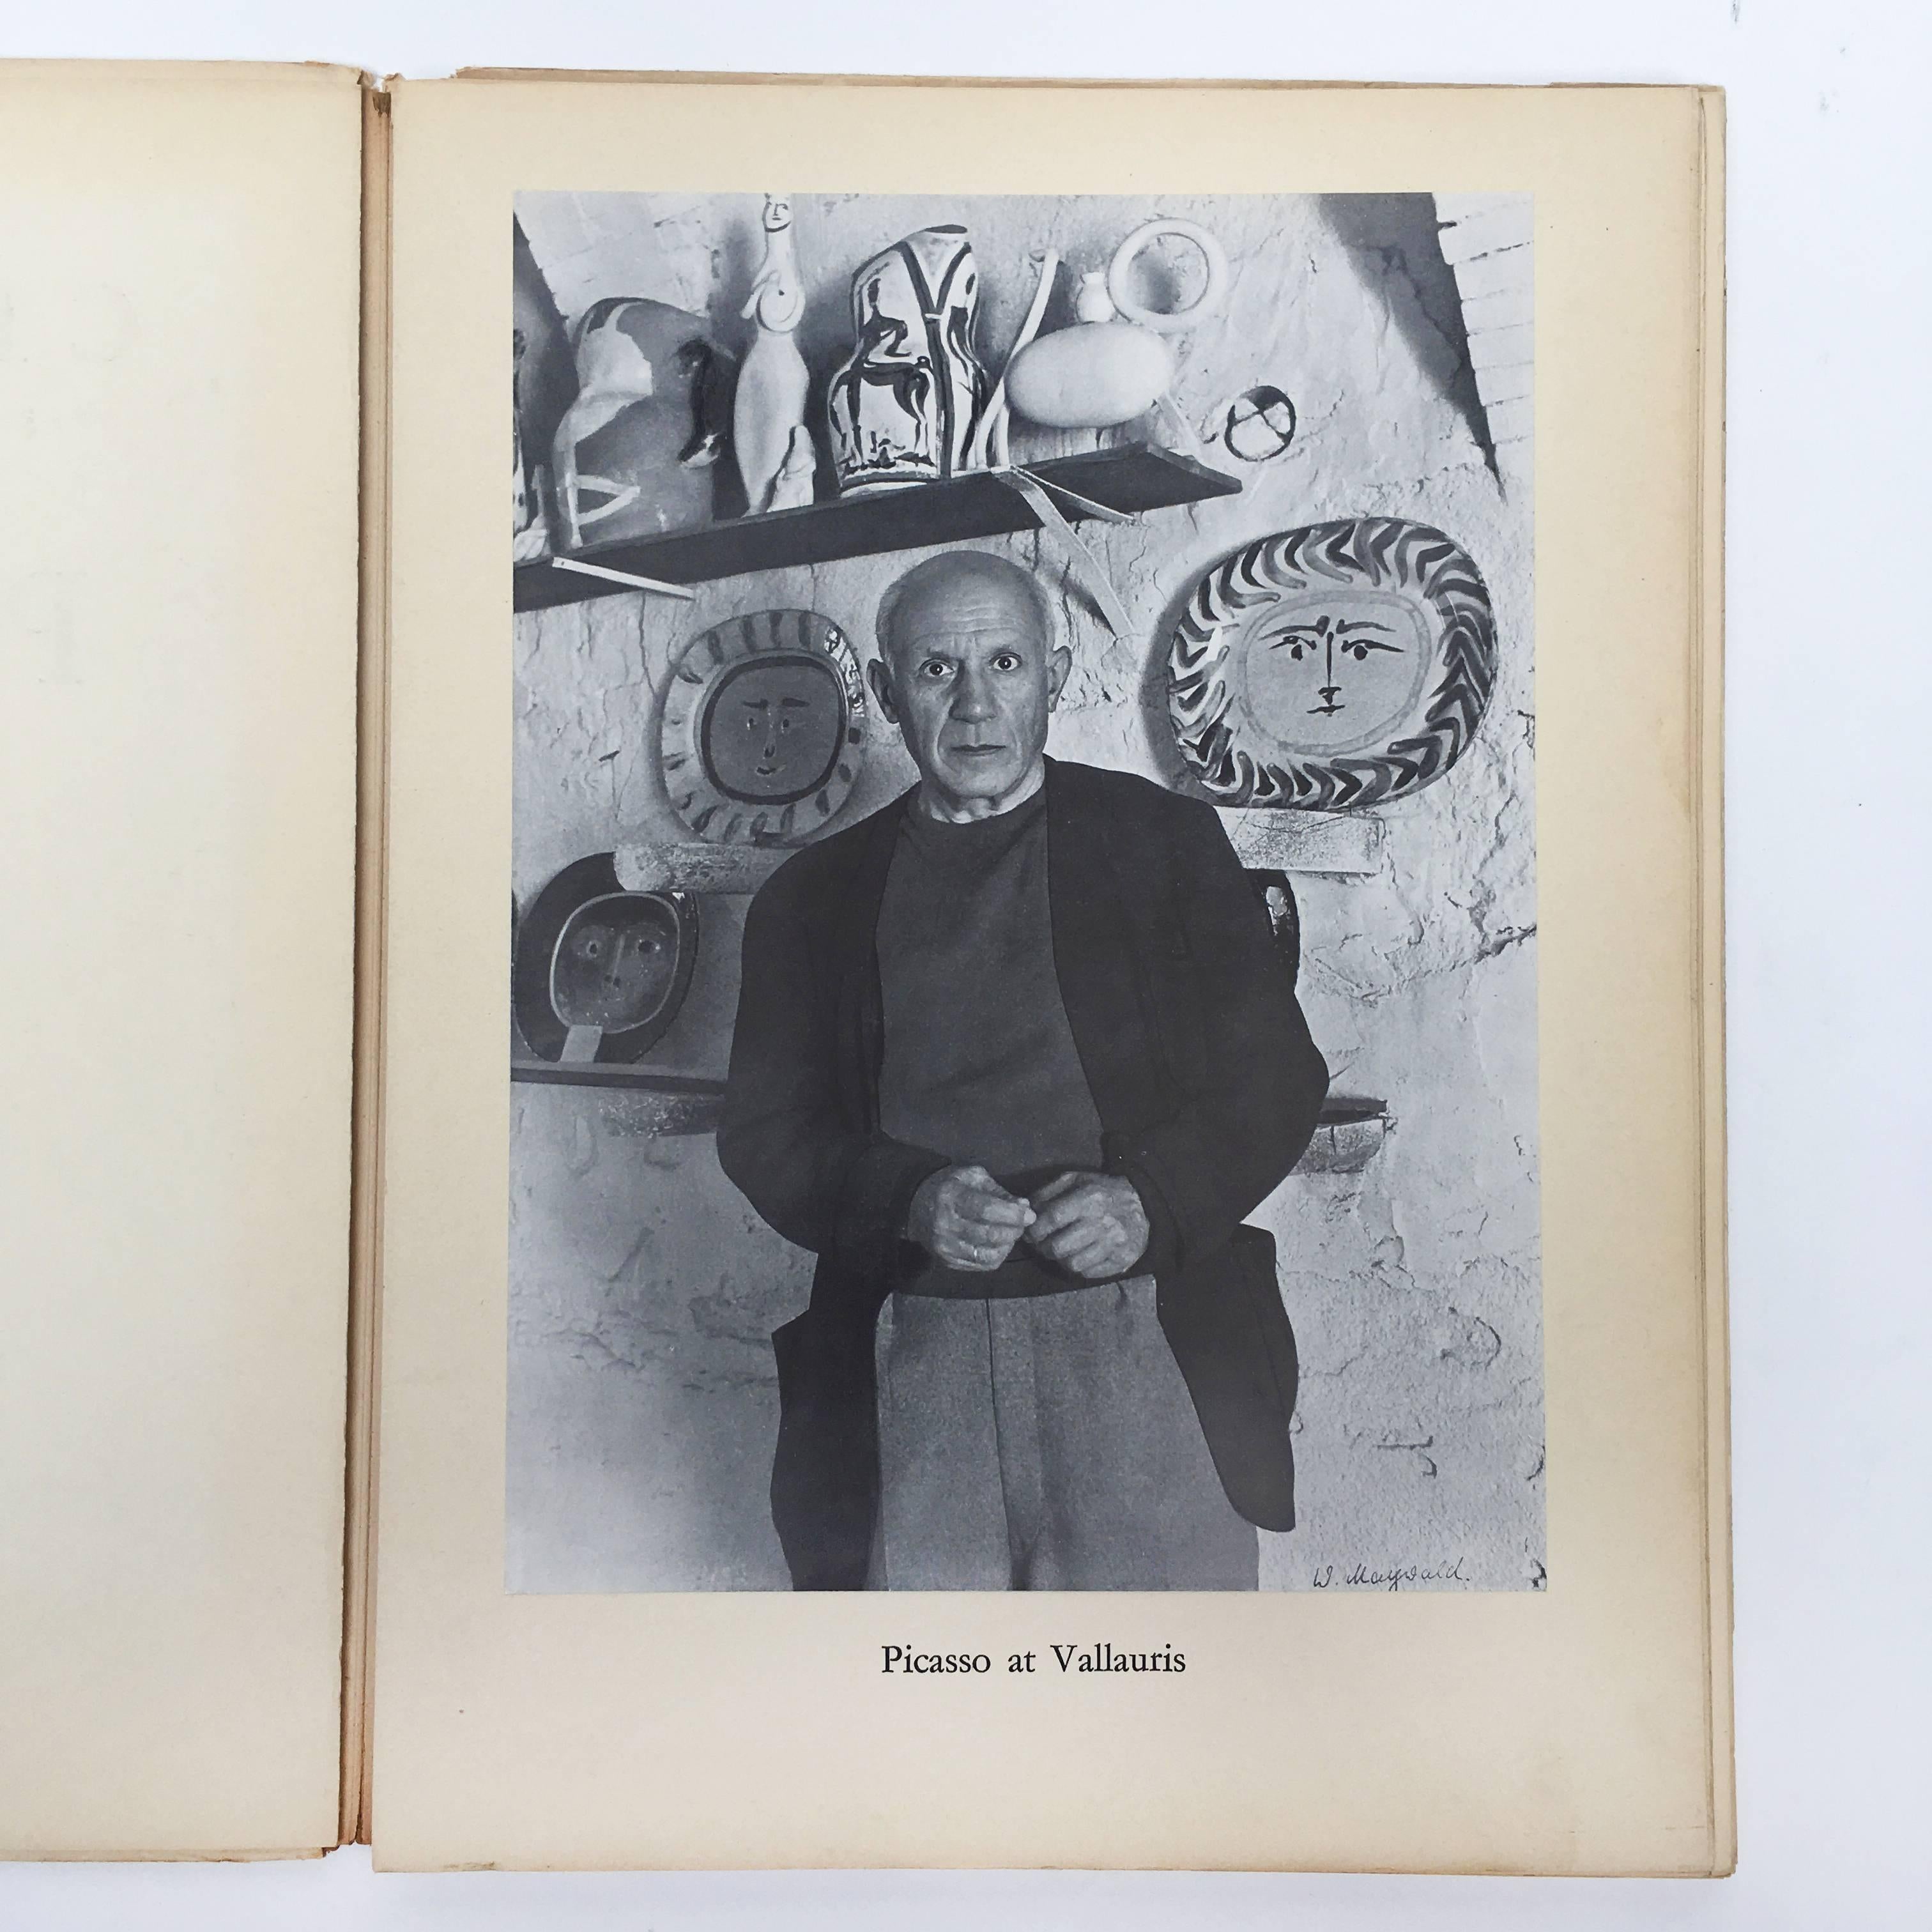 Picasso Ceramics Book 1st English Language Edition.

Published by Albert Skira, 1950. English language

This is a beautiful un-paginated portfolio of all 18 photographic plates of Picasso ceramics, 17 inside and one on the cover. Each of these